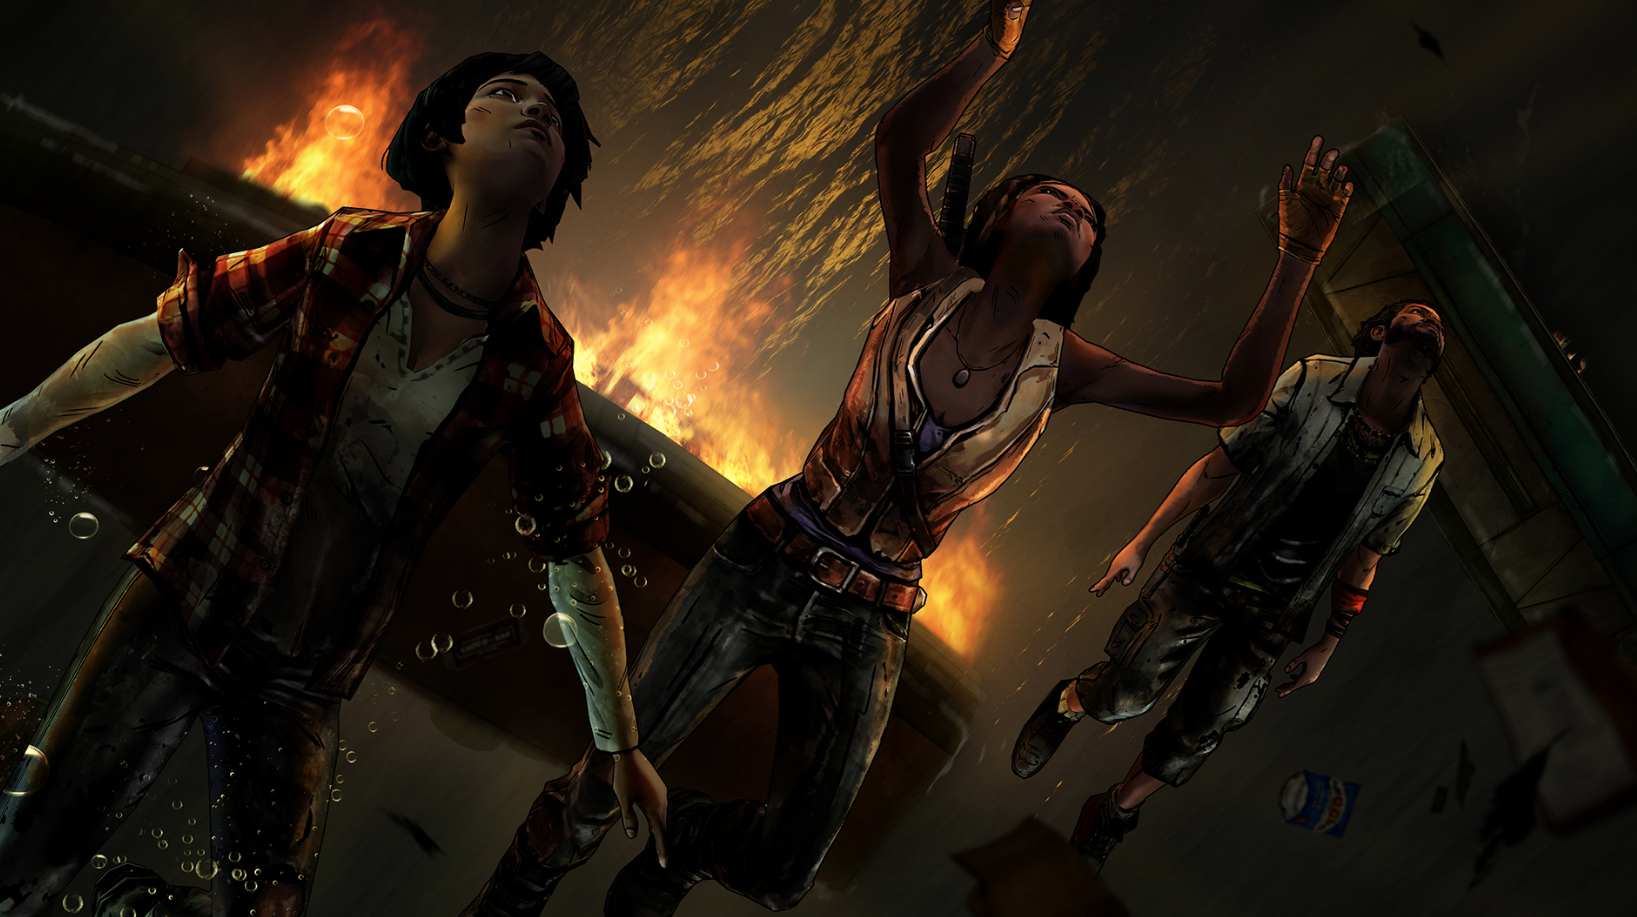 TWD Michonne ep2 Give No Shelter #5